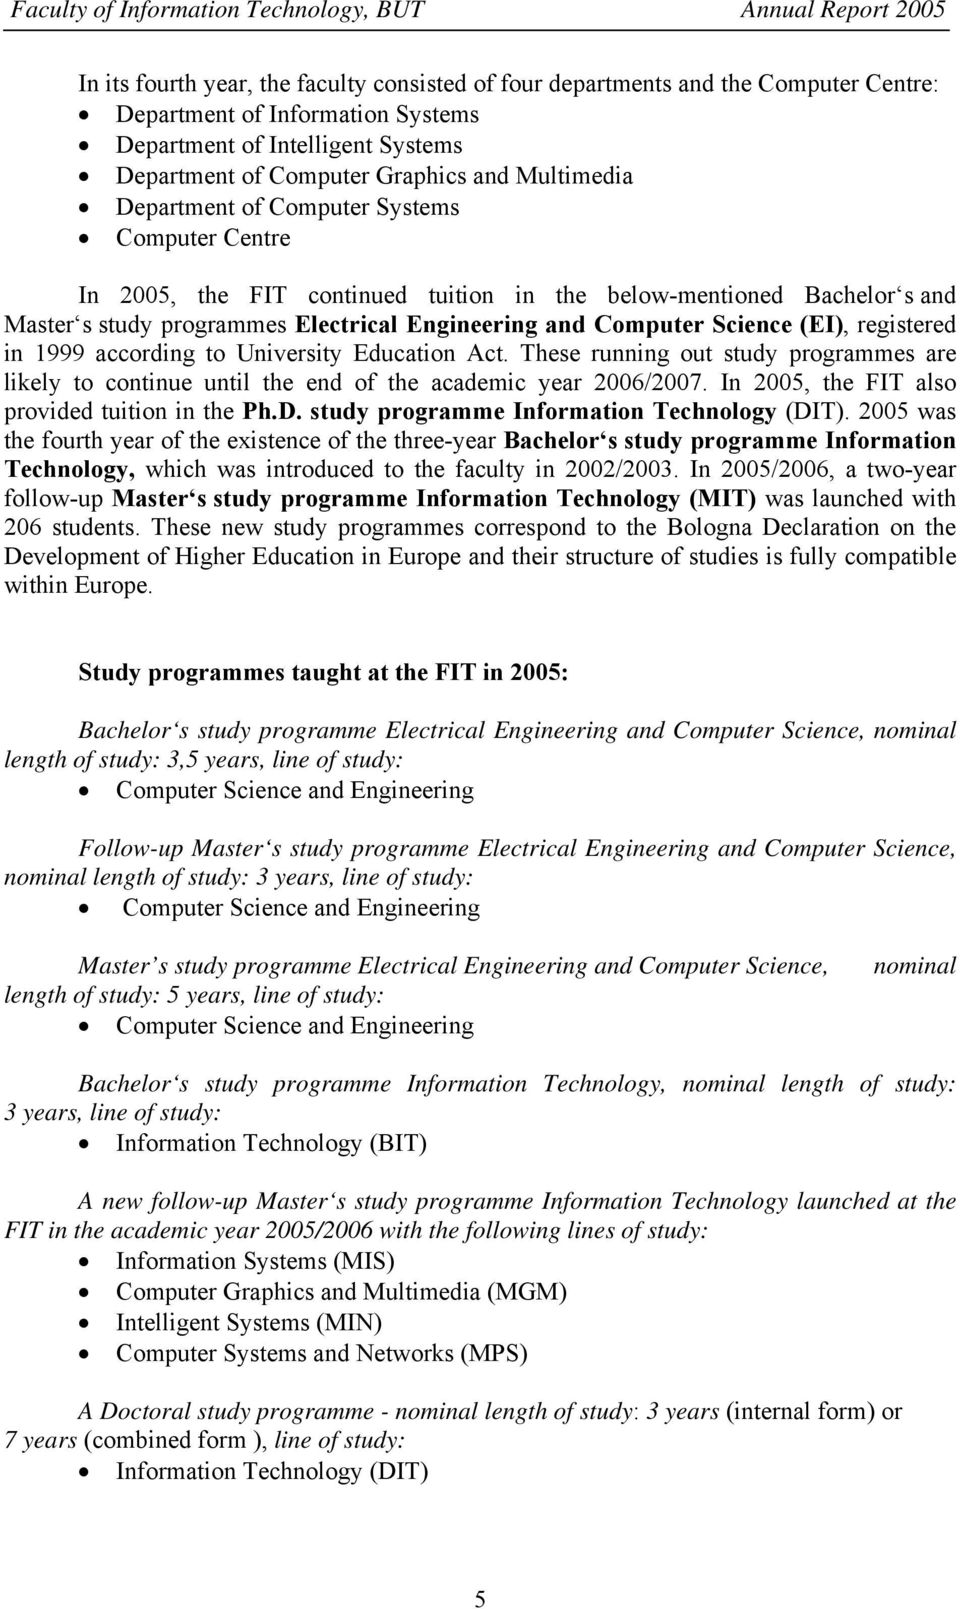 Science (EI), registered in 1999 according to University Education Act. These running out study programmes are likely to continue until the end of the academic year 2006/2007.